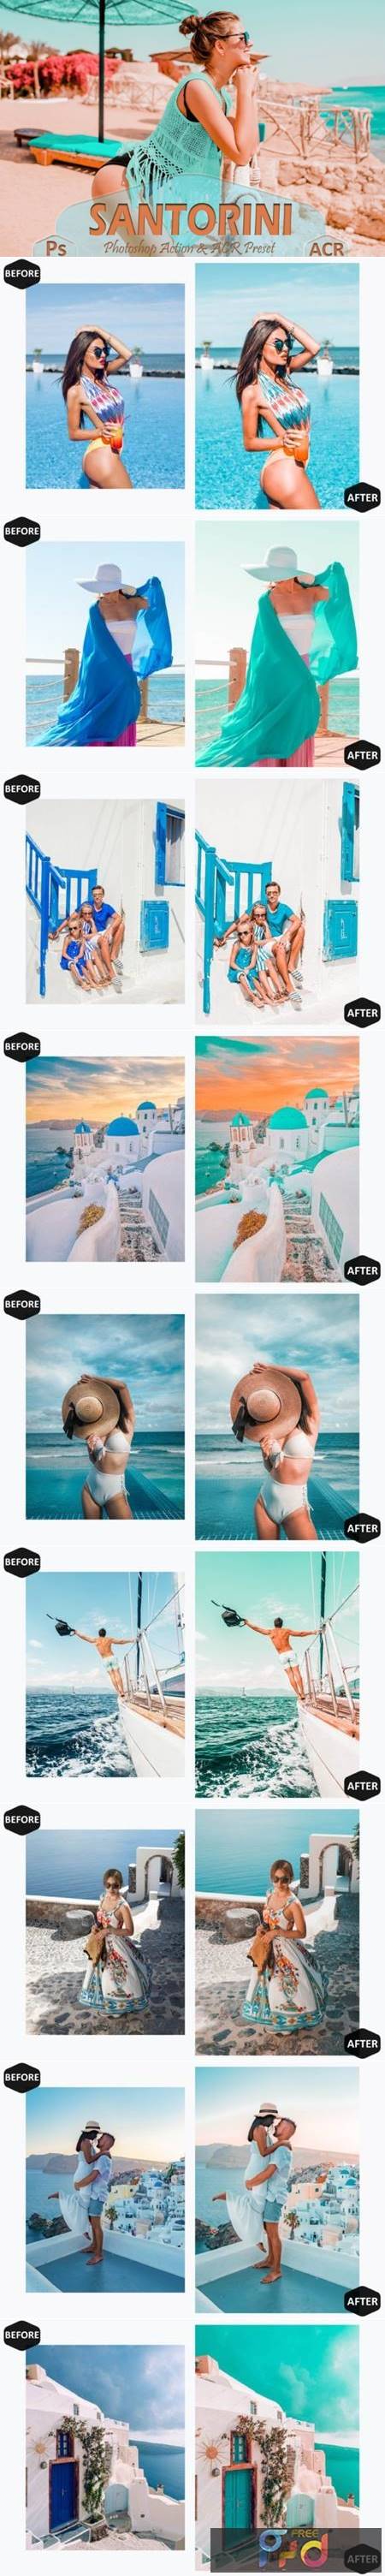 10 Santorini Photoshop Actions and ACR 69686699 1